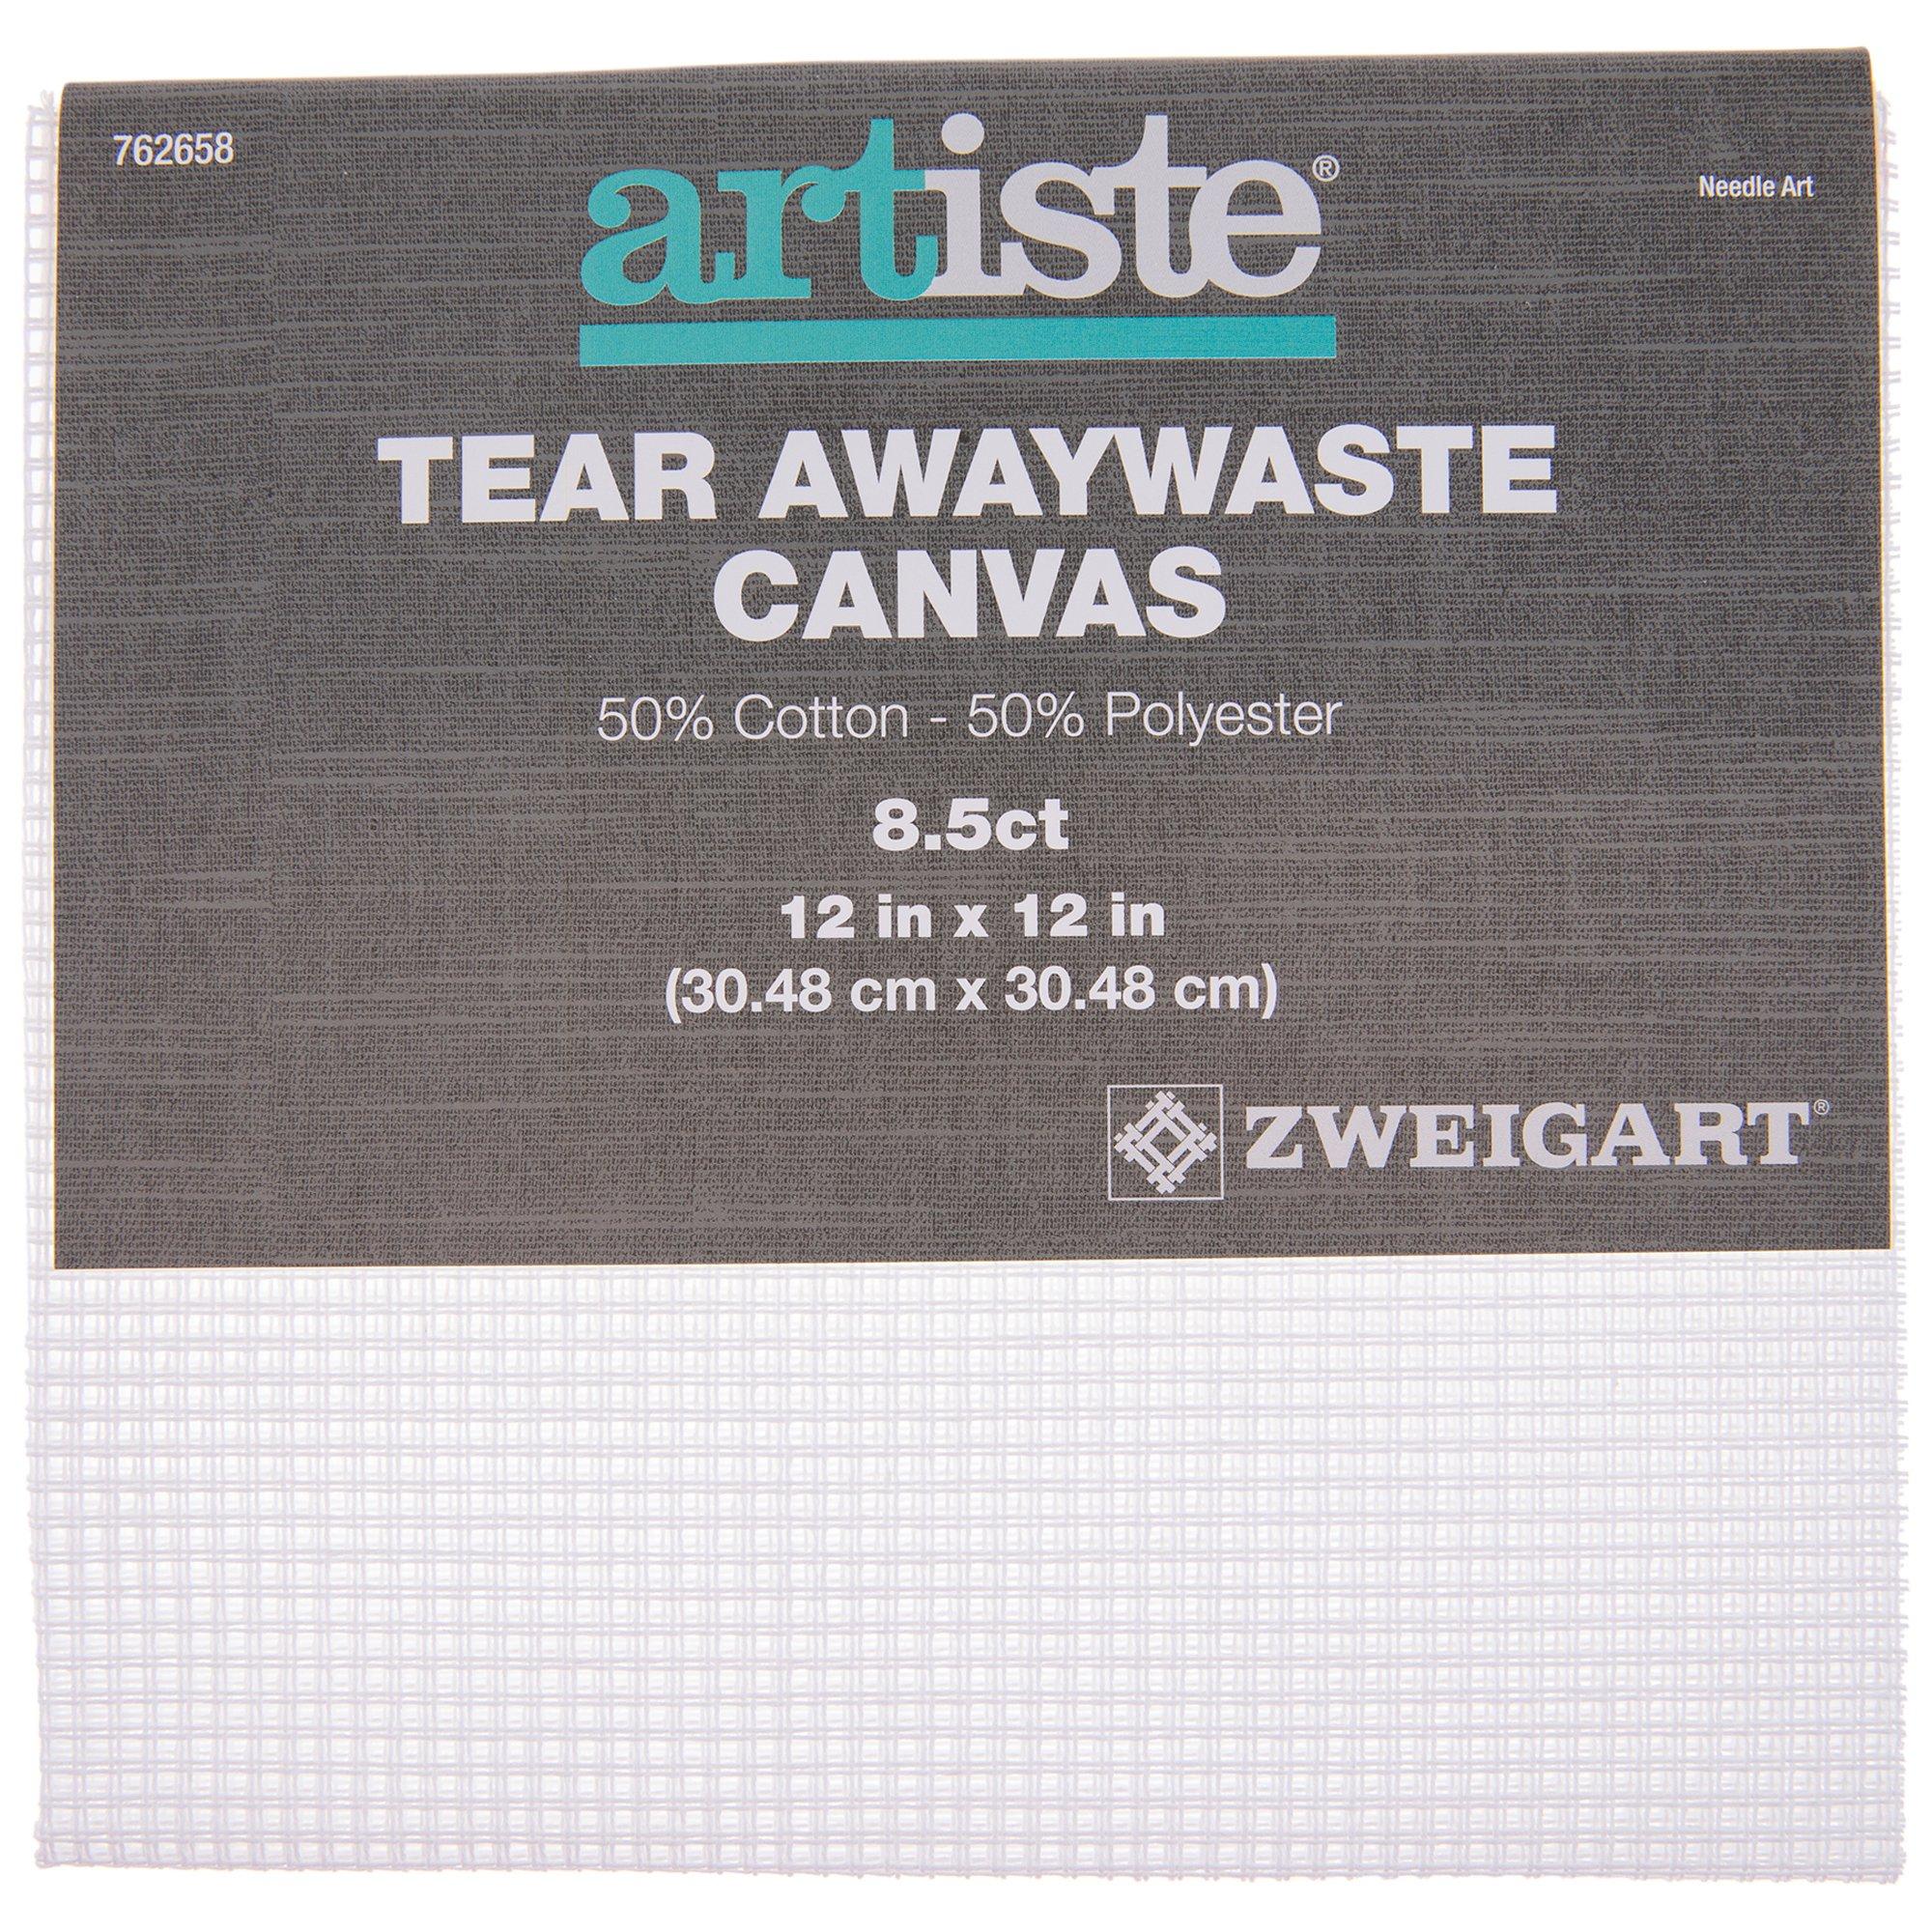 MCG 4 Textiles 14 Count Fid Weave 8.5 Count Tear Away Waste Cross Stitch  Fabric